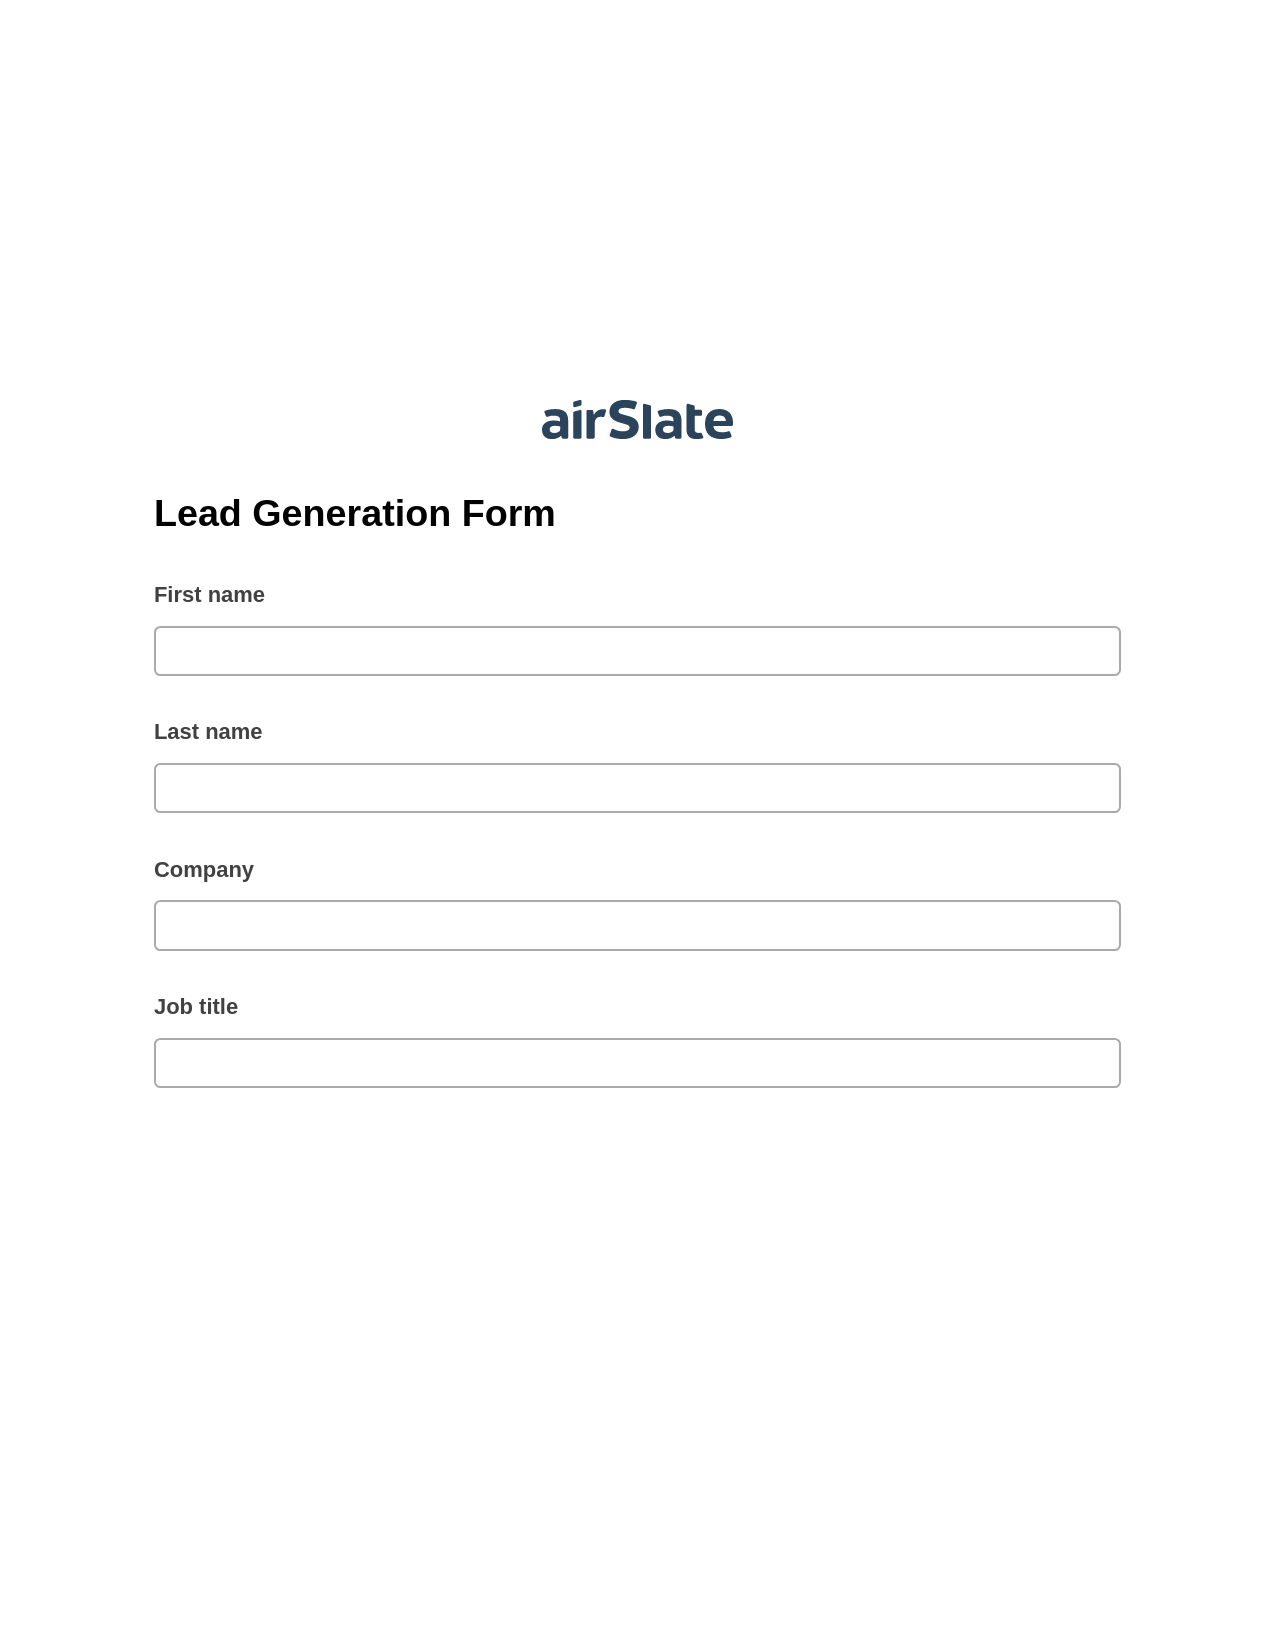 Lead Generation Form Pre-fill from Salesforce Records Bot, Reminder Bot, Archive to Box Bot